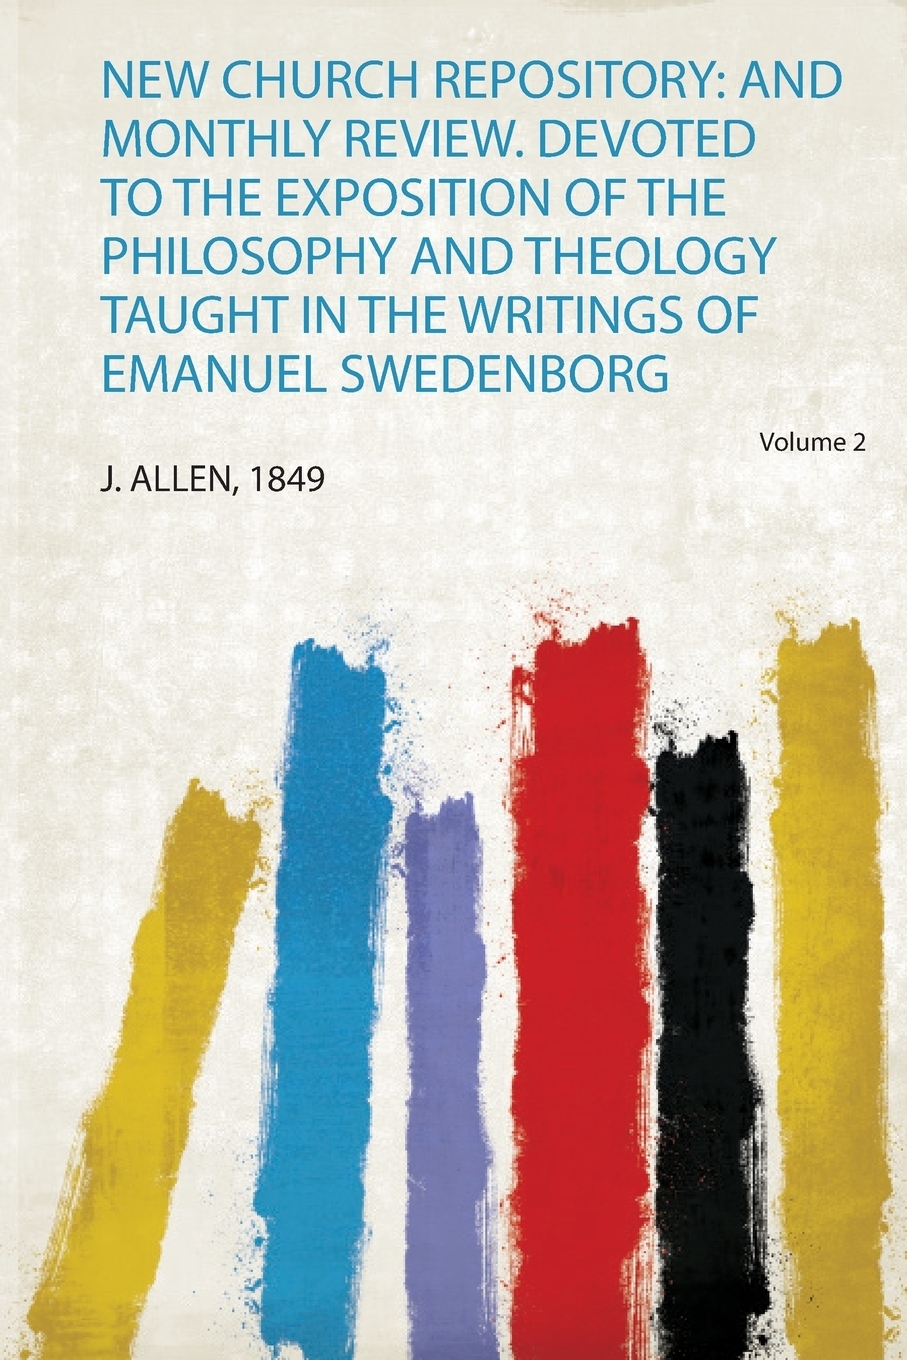 New Church Repository. and Monthly Review. Devoted to the Exposition of the Philosophy and Theology Taught in the Writings of Emanuel Swedenborg